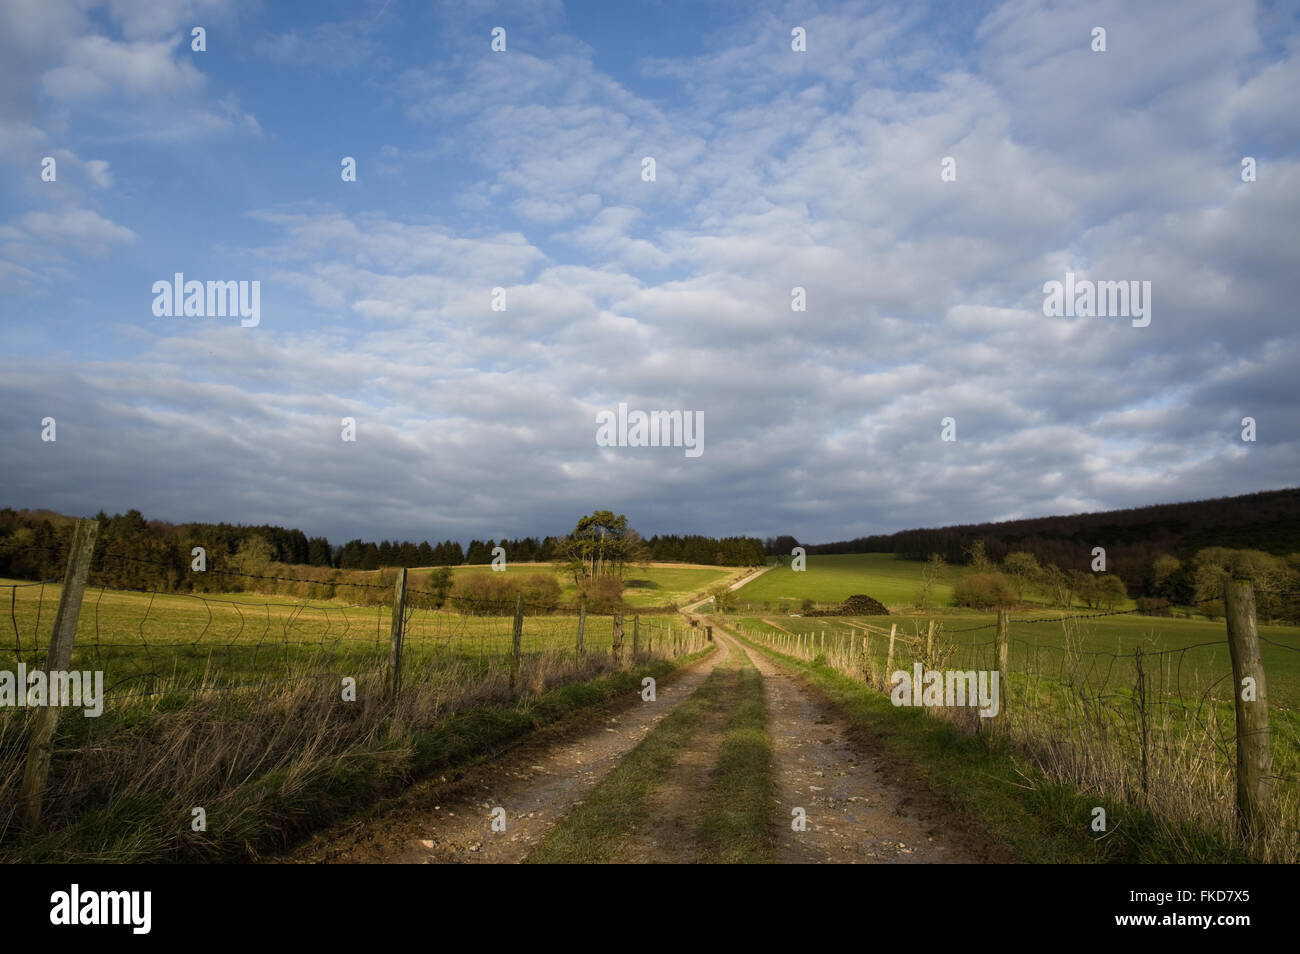 A country track leading into the distance through fields, just before sunset. Stock Photo